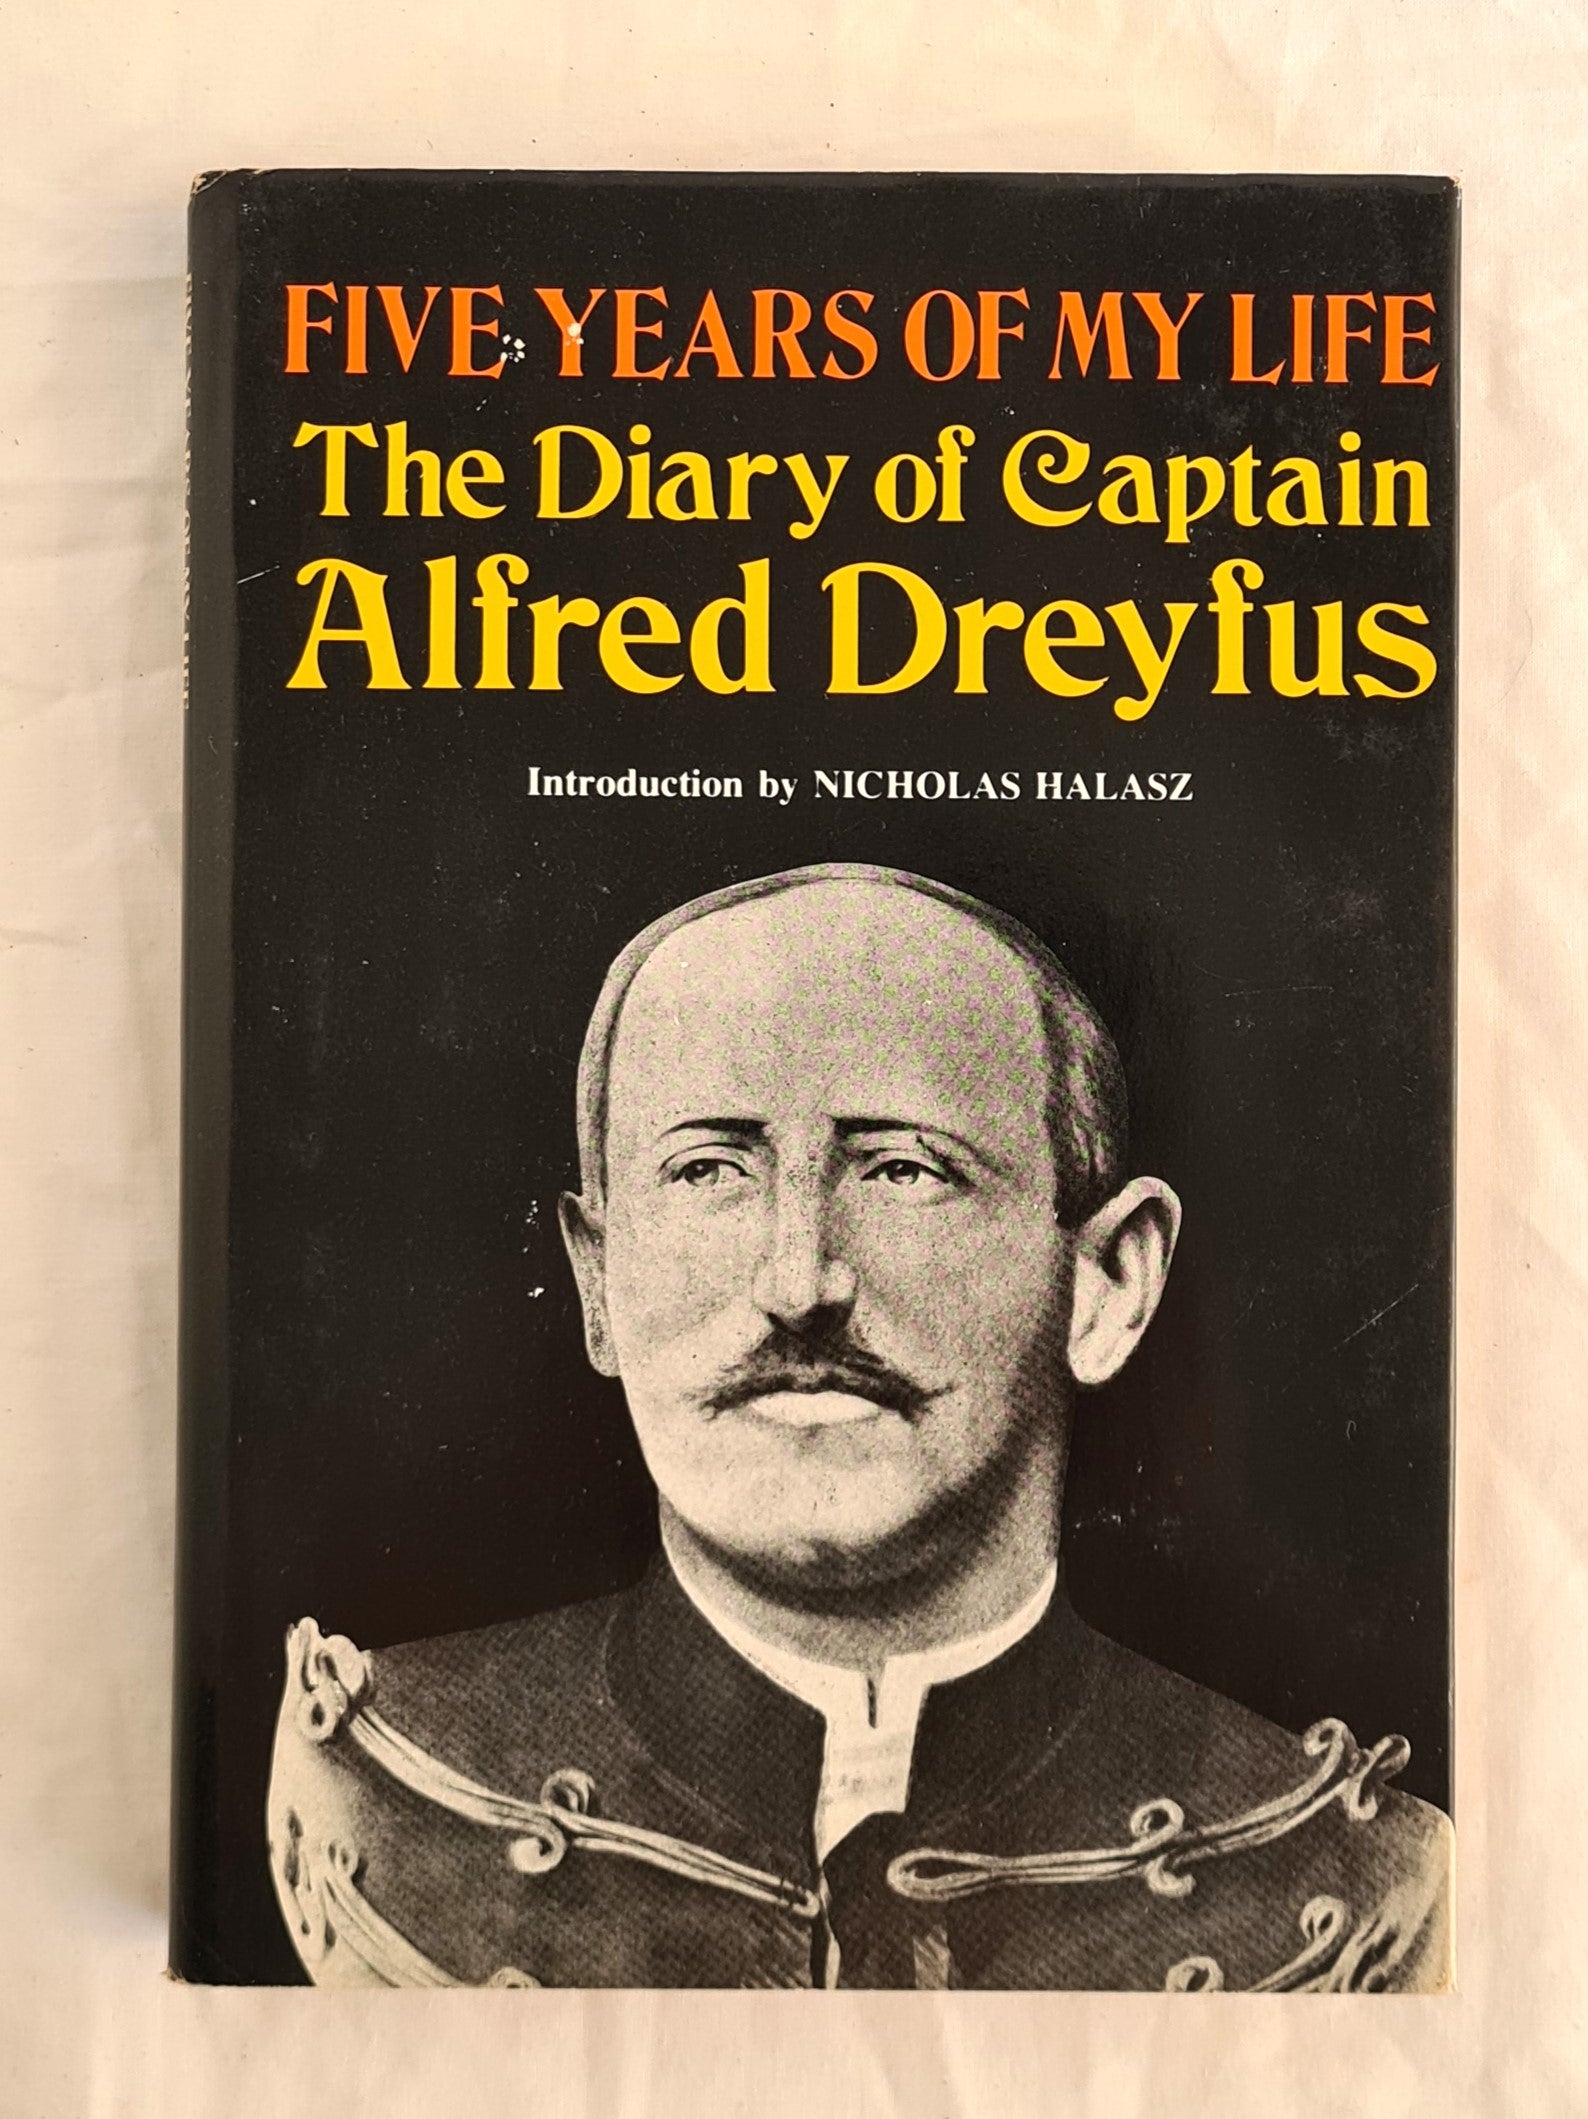 Five Years of My Life  The Diary of Captain Alfred Dreyfus  Designed by Christopher Simon